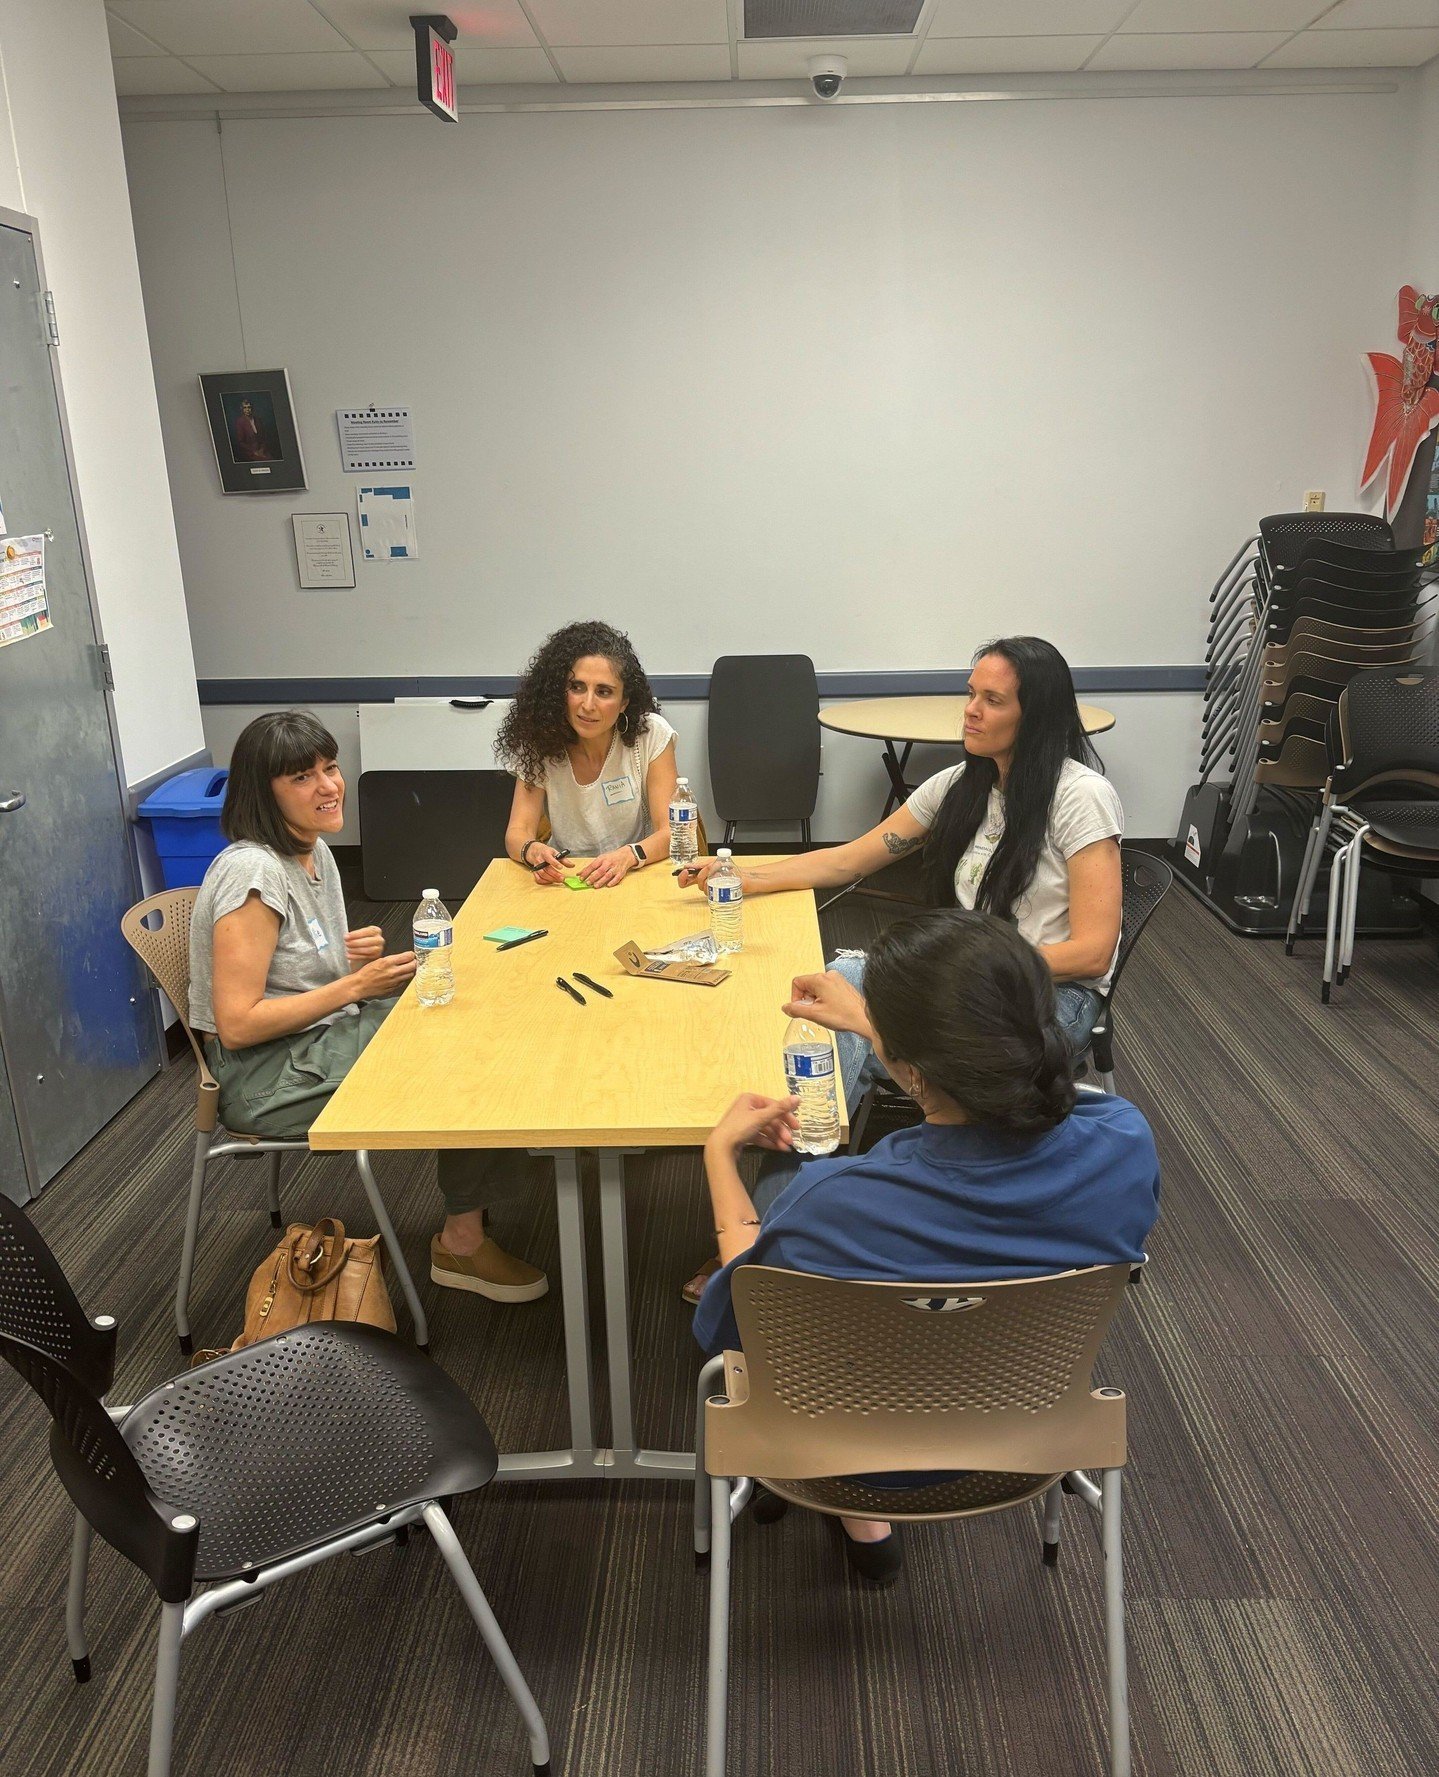 Our Austin Mentor Circle is buzzing with energy! 🐝Girls and mentors spilled the tea on their mentorship journey - surprises, expectations met, and all the adventures in between! 🌟 Want to be part of this awesome support squad? Apply for mentorship 